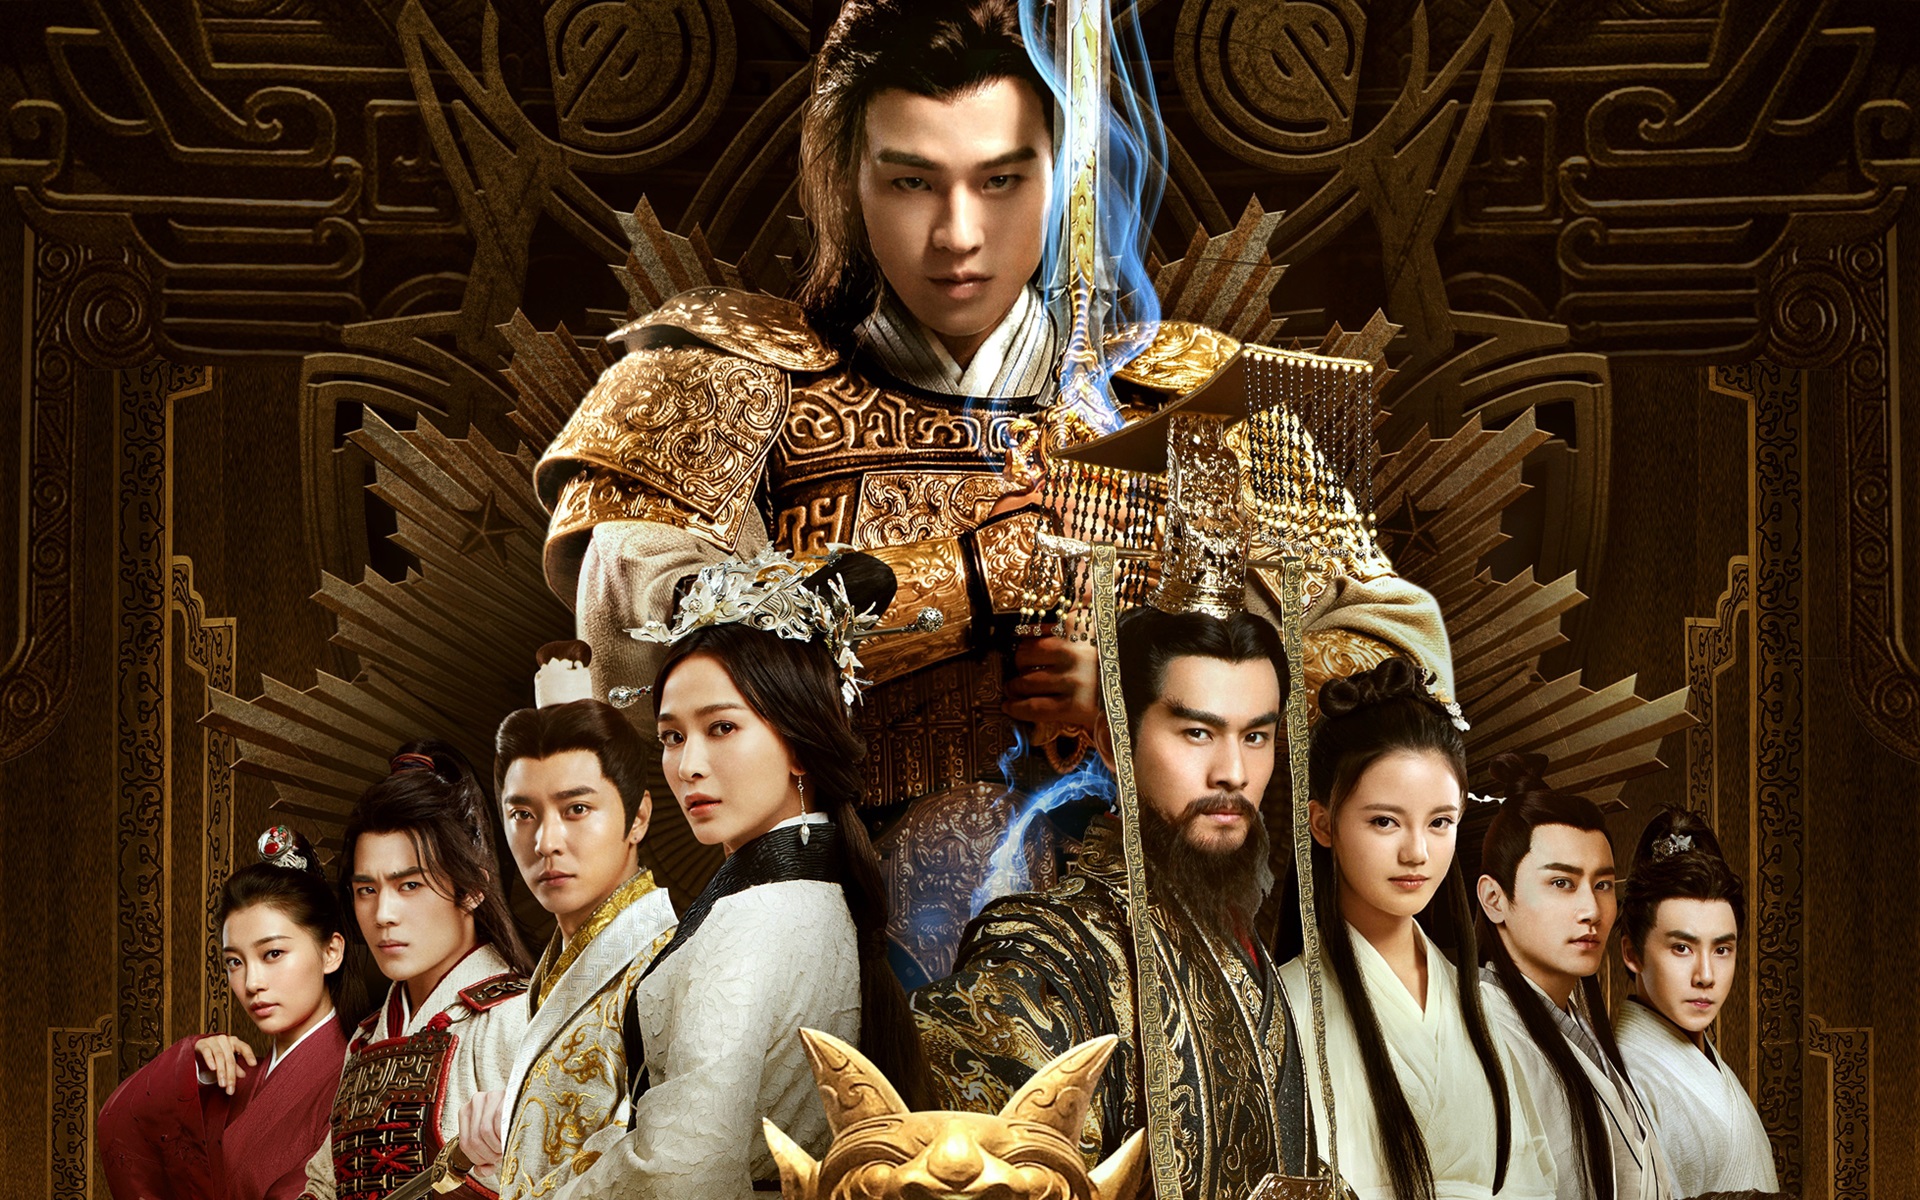 Wallpapers Hero's Dream, Chinese movie 1920x1200 HD Picture, Image.